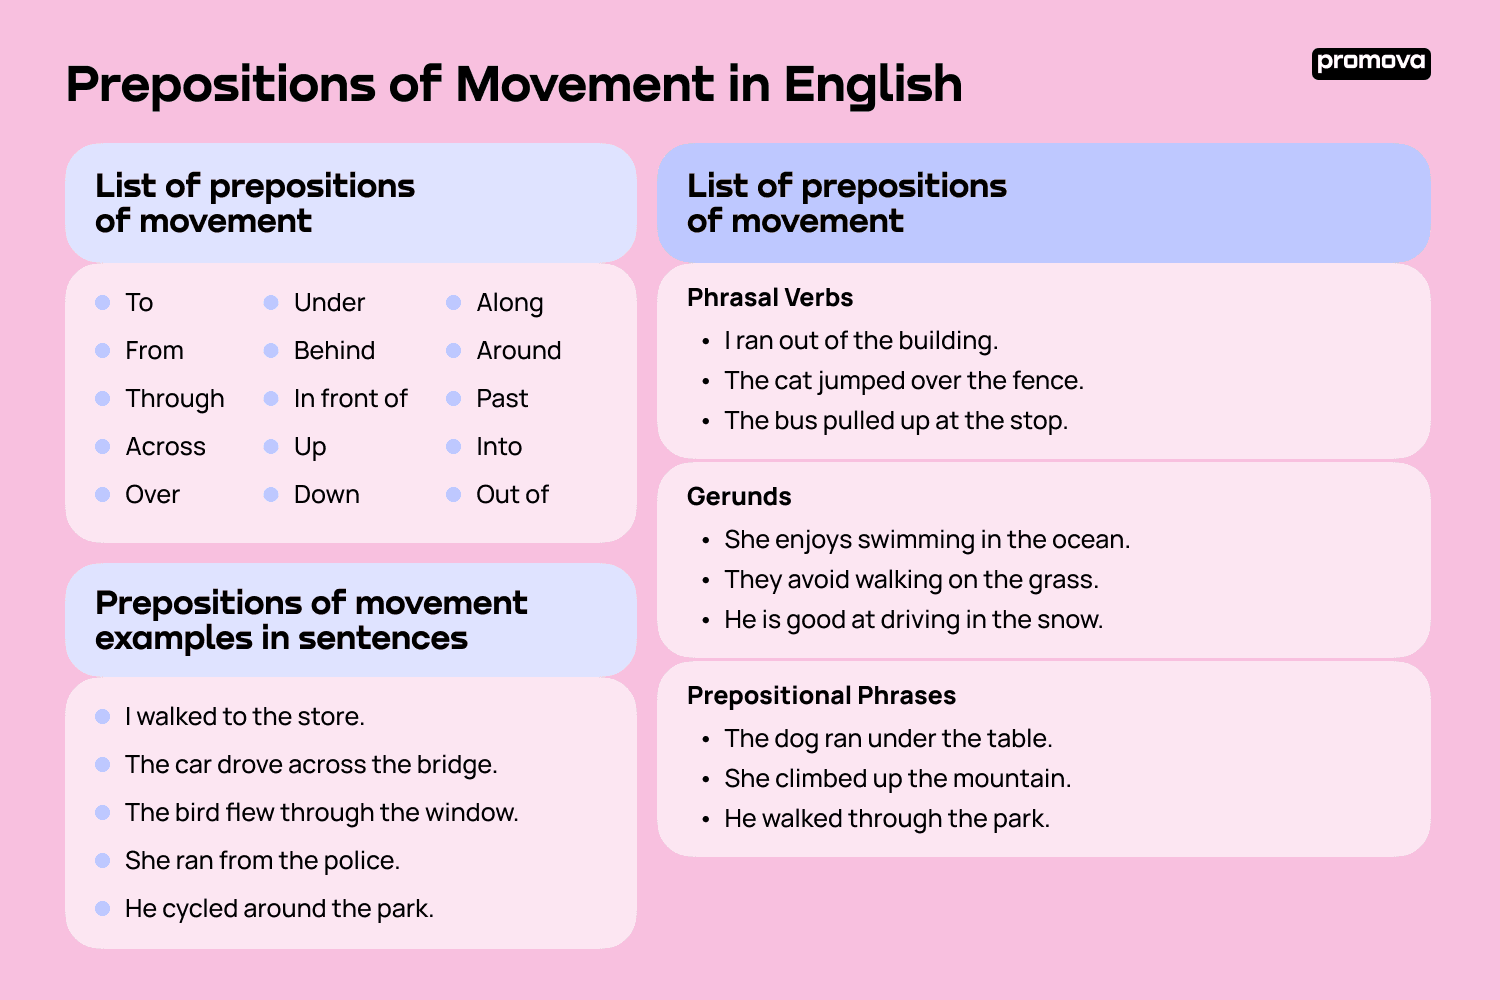 List of prepositions of movement